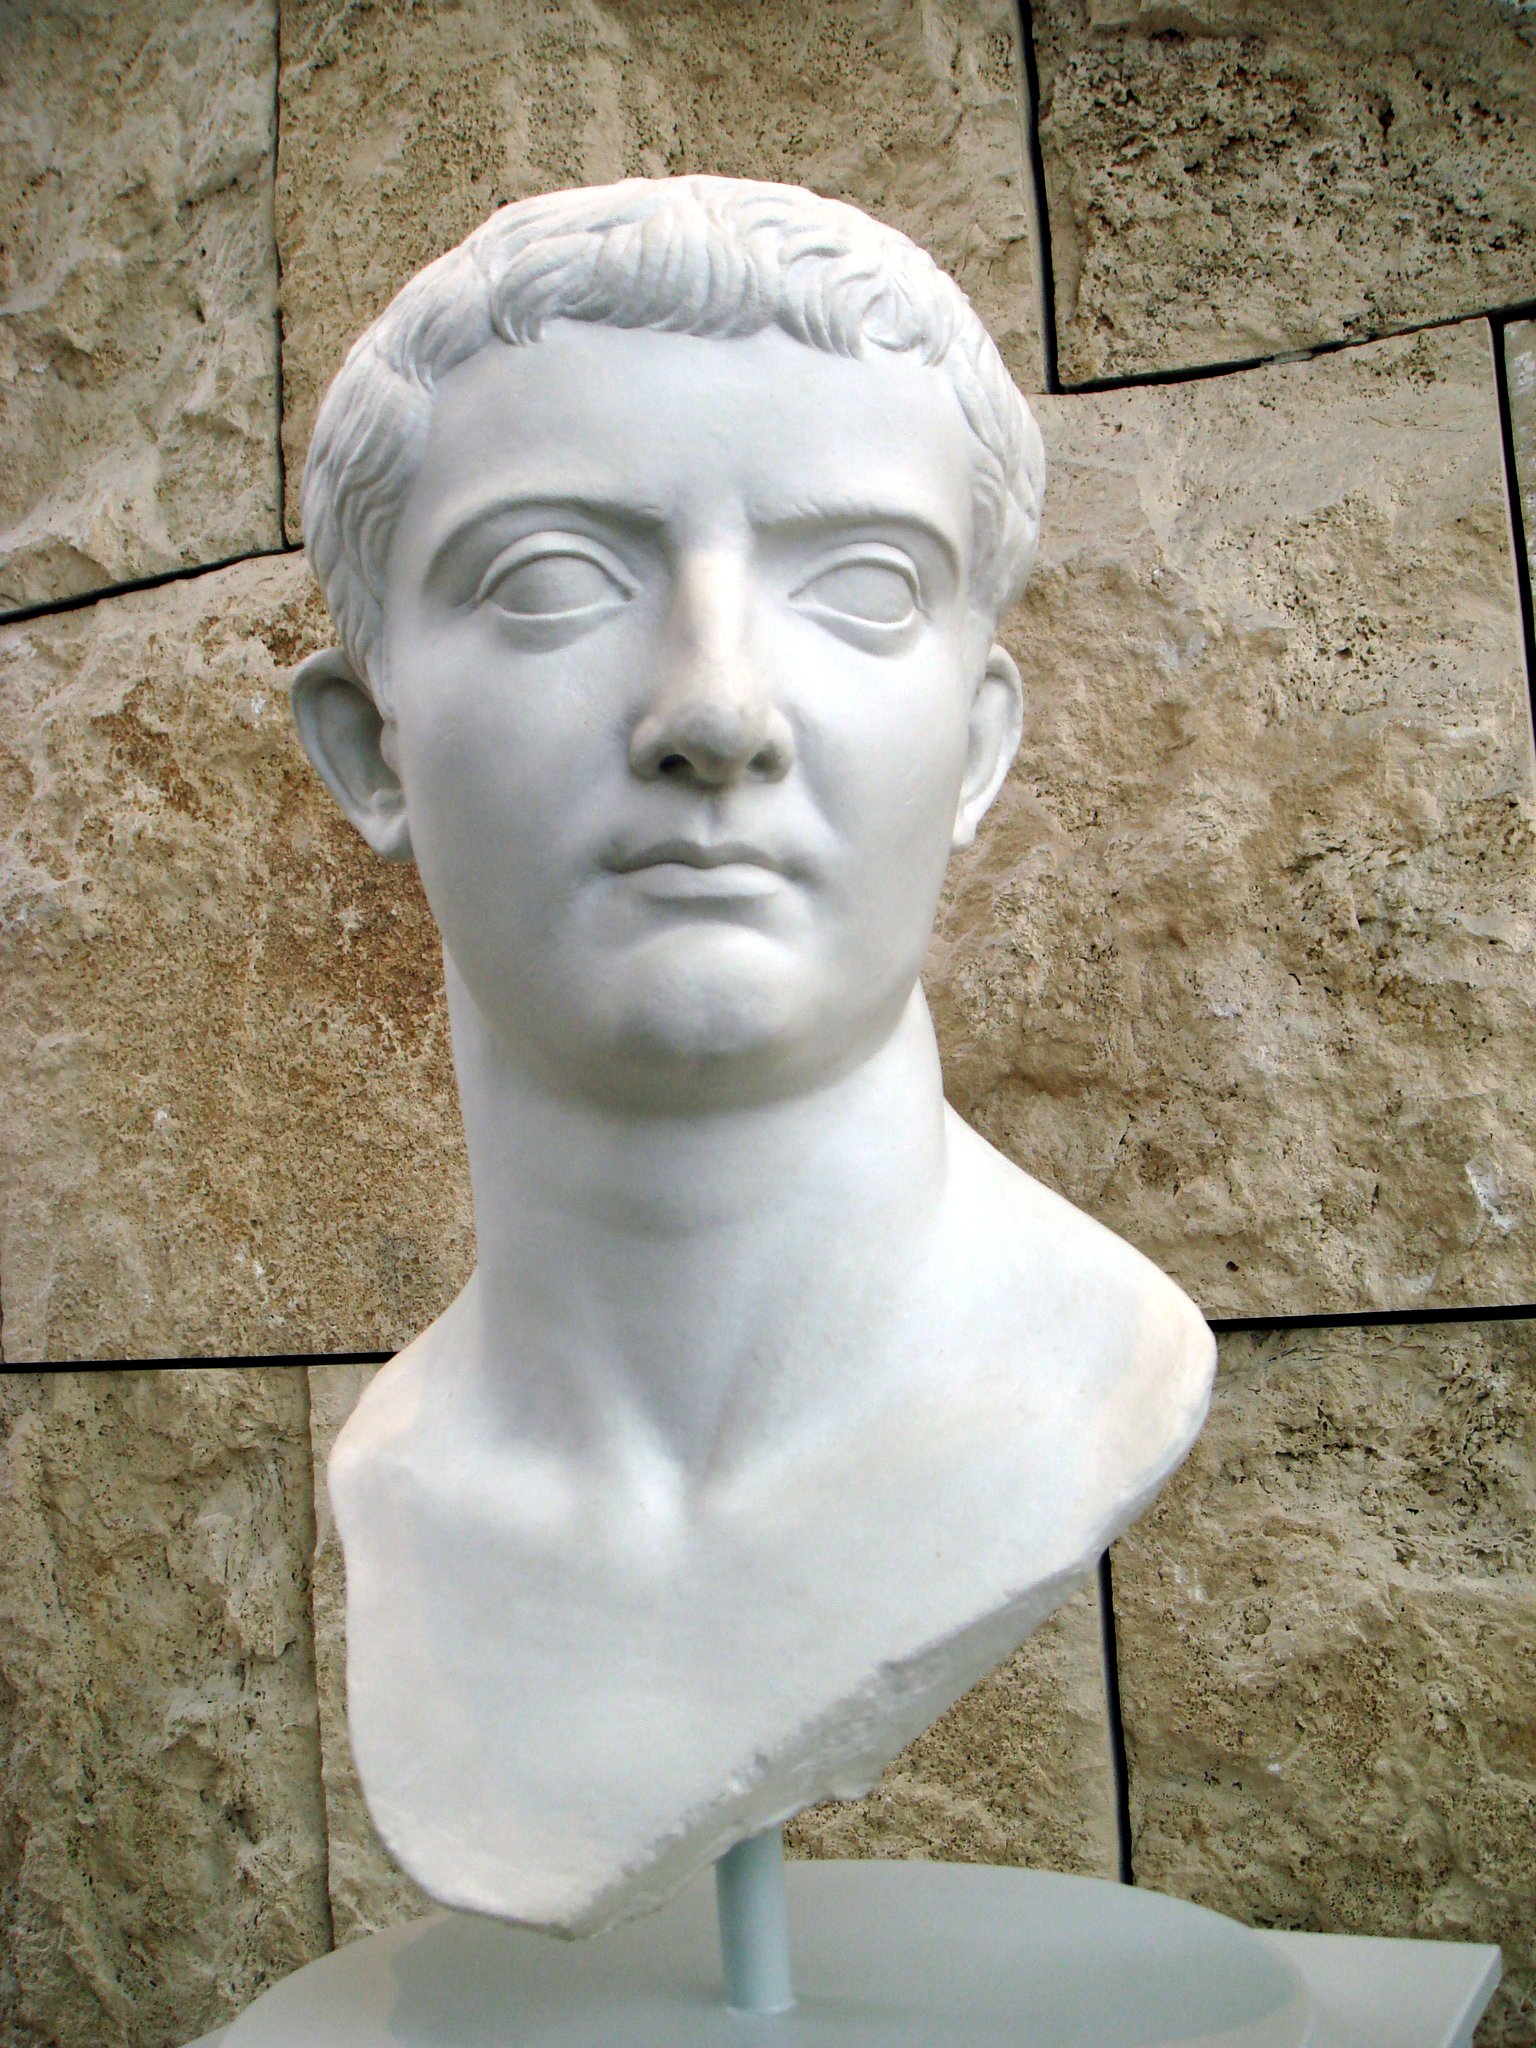 Tiberius Caesar was emperor of the Roman Empire during the time of Jesus&#39; ministry. This bust of Tiberius is displayed in the Ara Pacis Museum in Rome. - 20-tiberius-rome